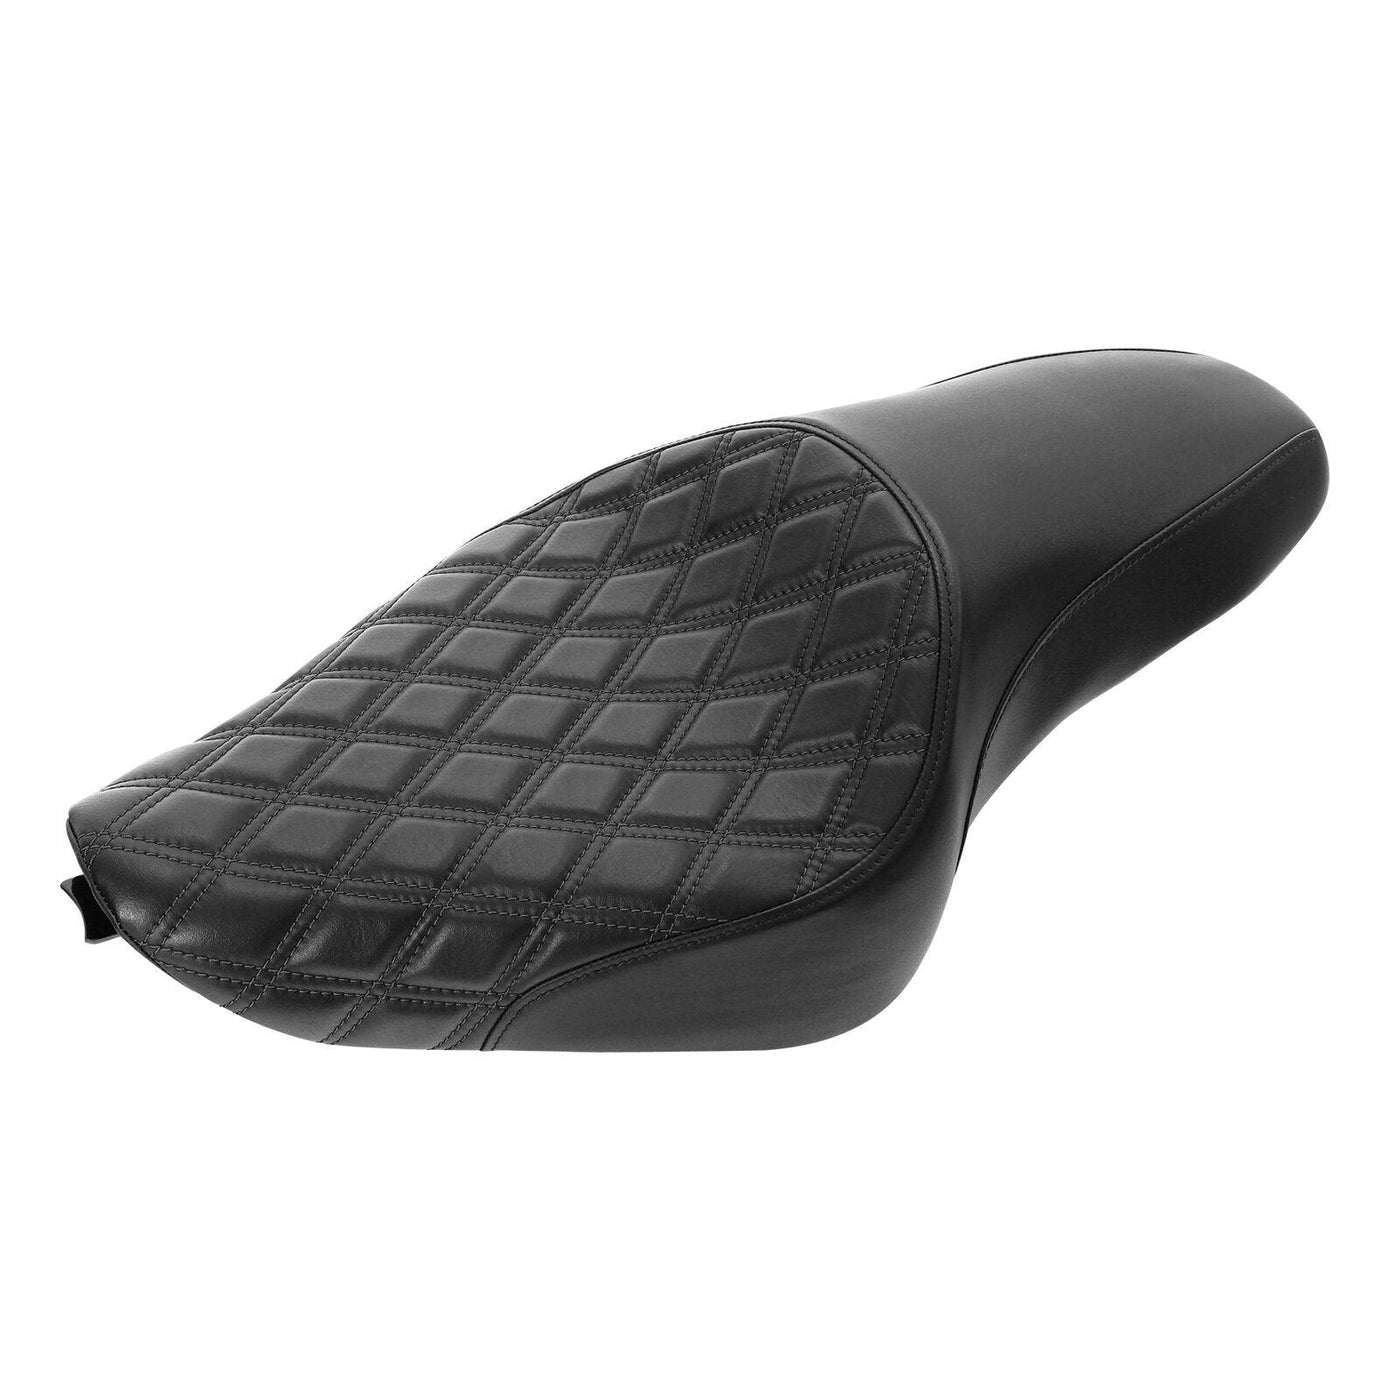 Black Driver Passenger Seat Cushion Fit For Harley Sportster Iron XL 2004-2022 - Moto Life Products